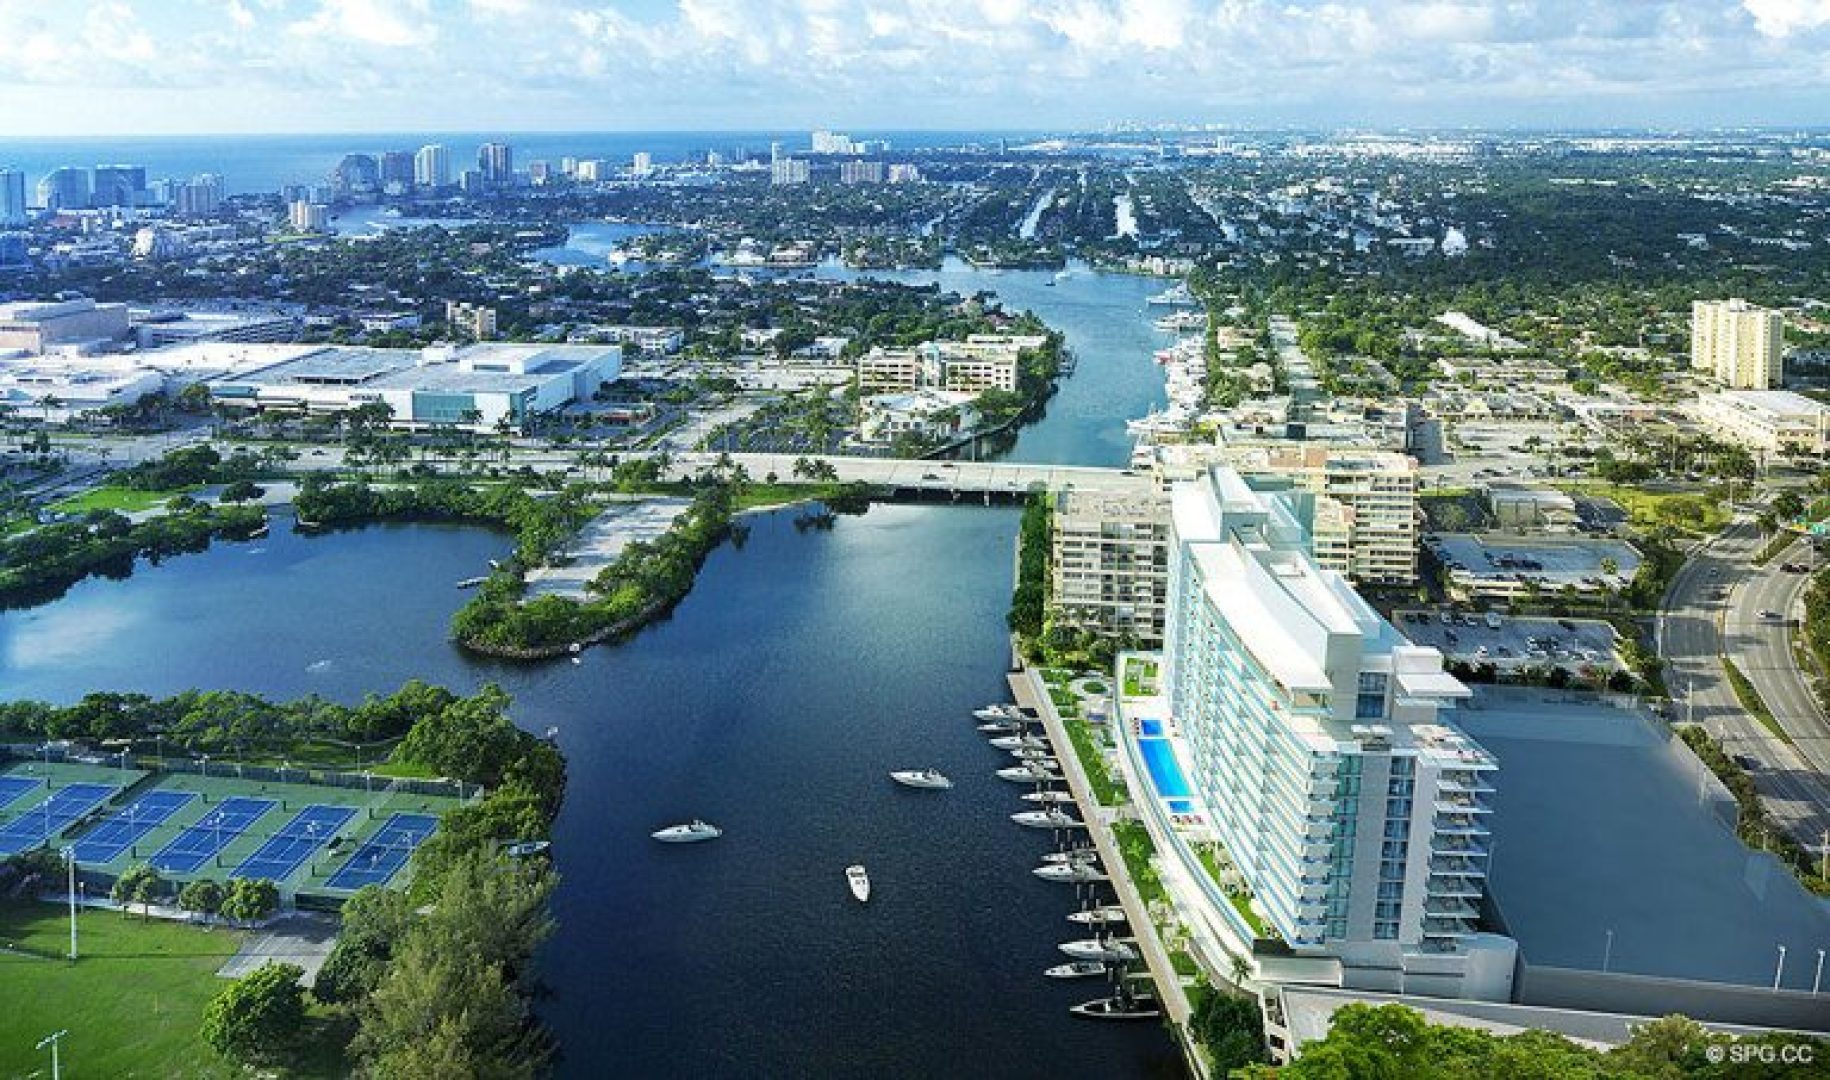 Aerial Intracoastal View of Riva, Luxury Waterfront Condos in Fort Lauderdale, Florida 33304.